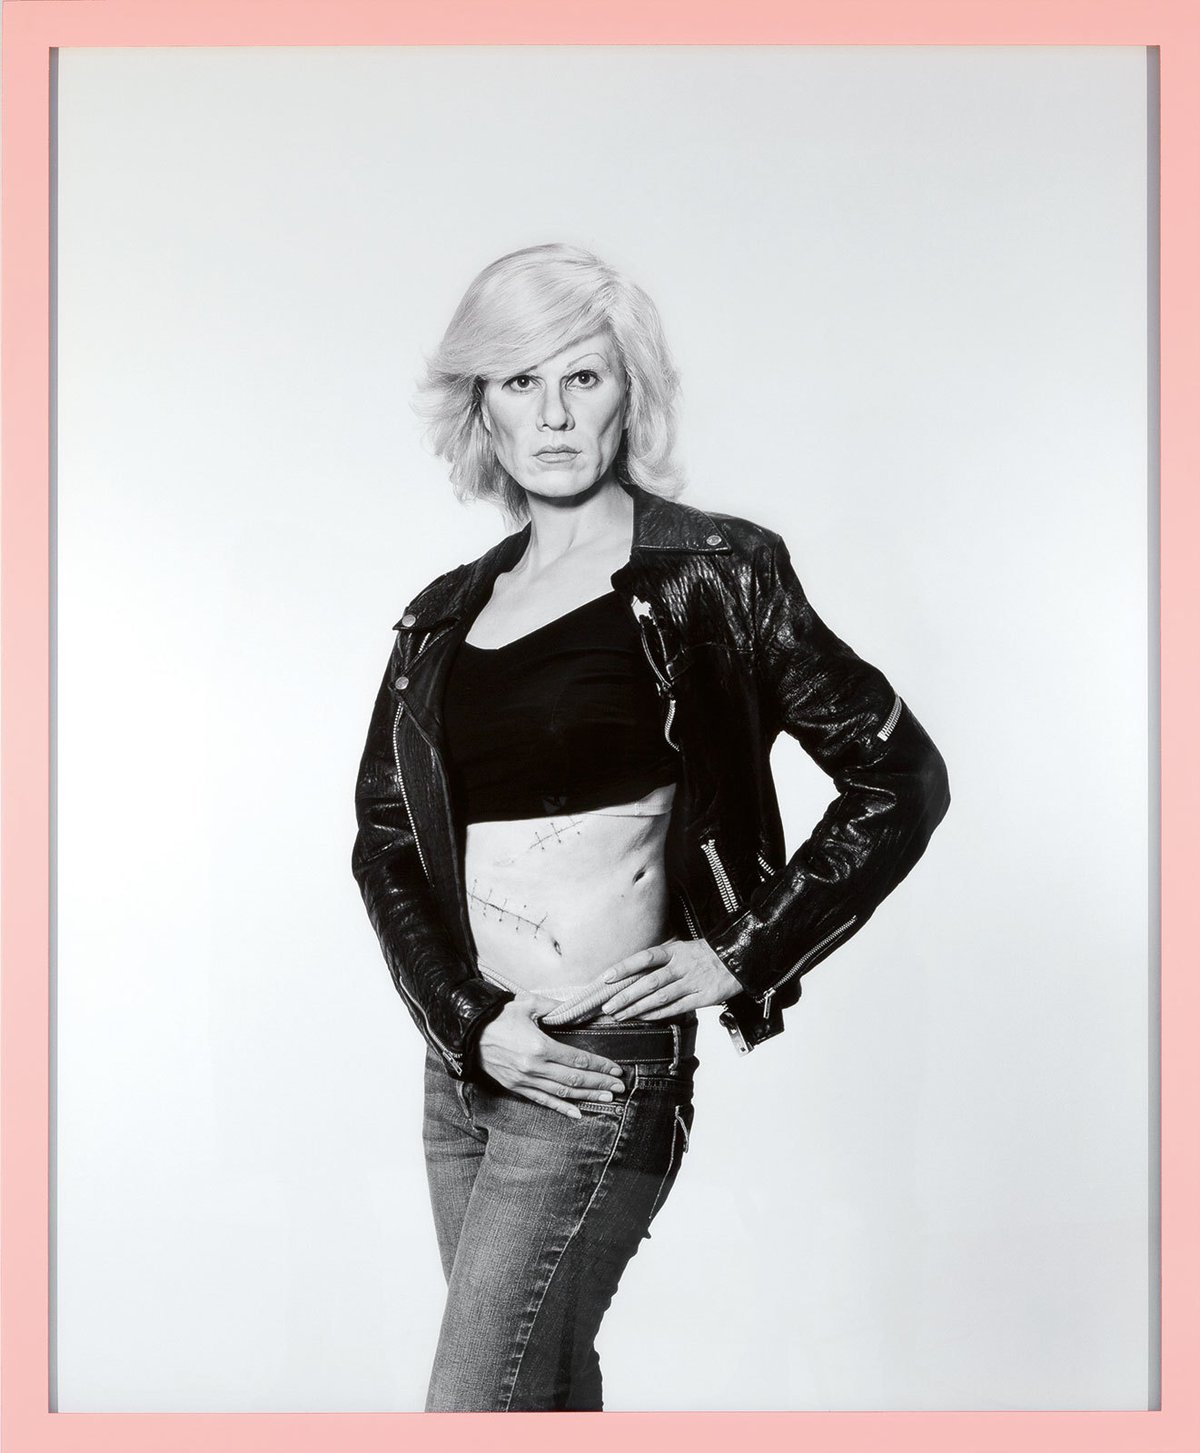 Gillian Wearing, Me as Warhol in Drag with Scar, 2010.Framed bromide print, 156 x 133 cm. © Gillian Wearing.Courtesy of Maureen Paley, London / Hove.